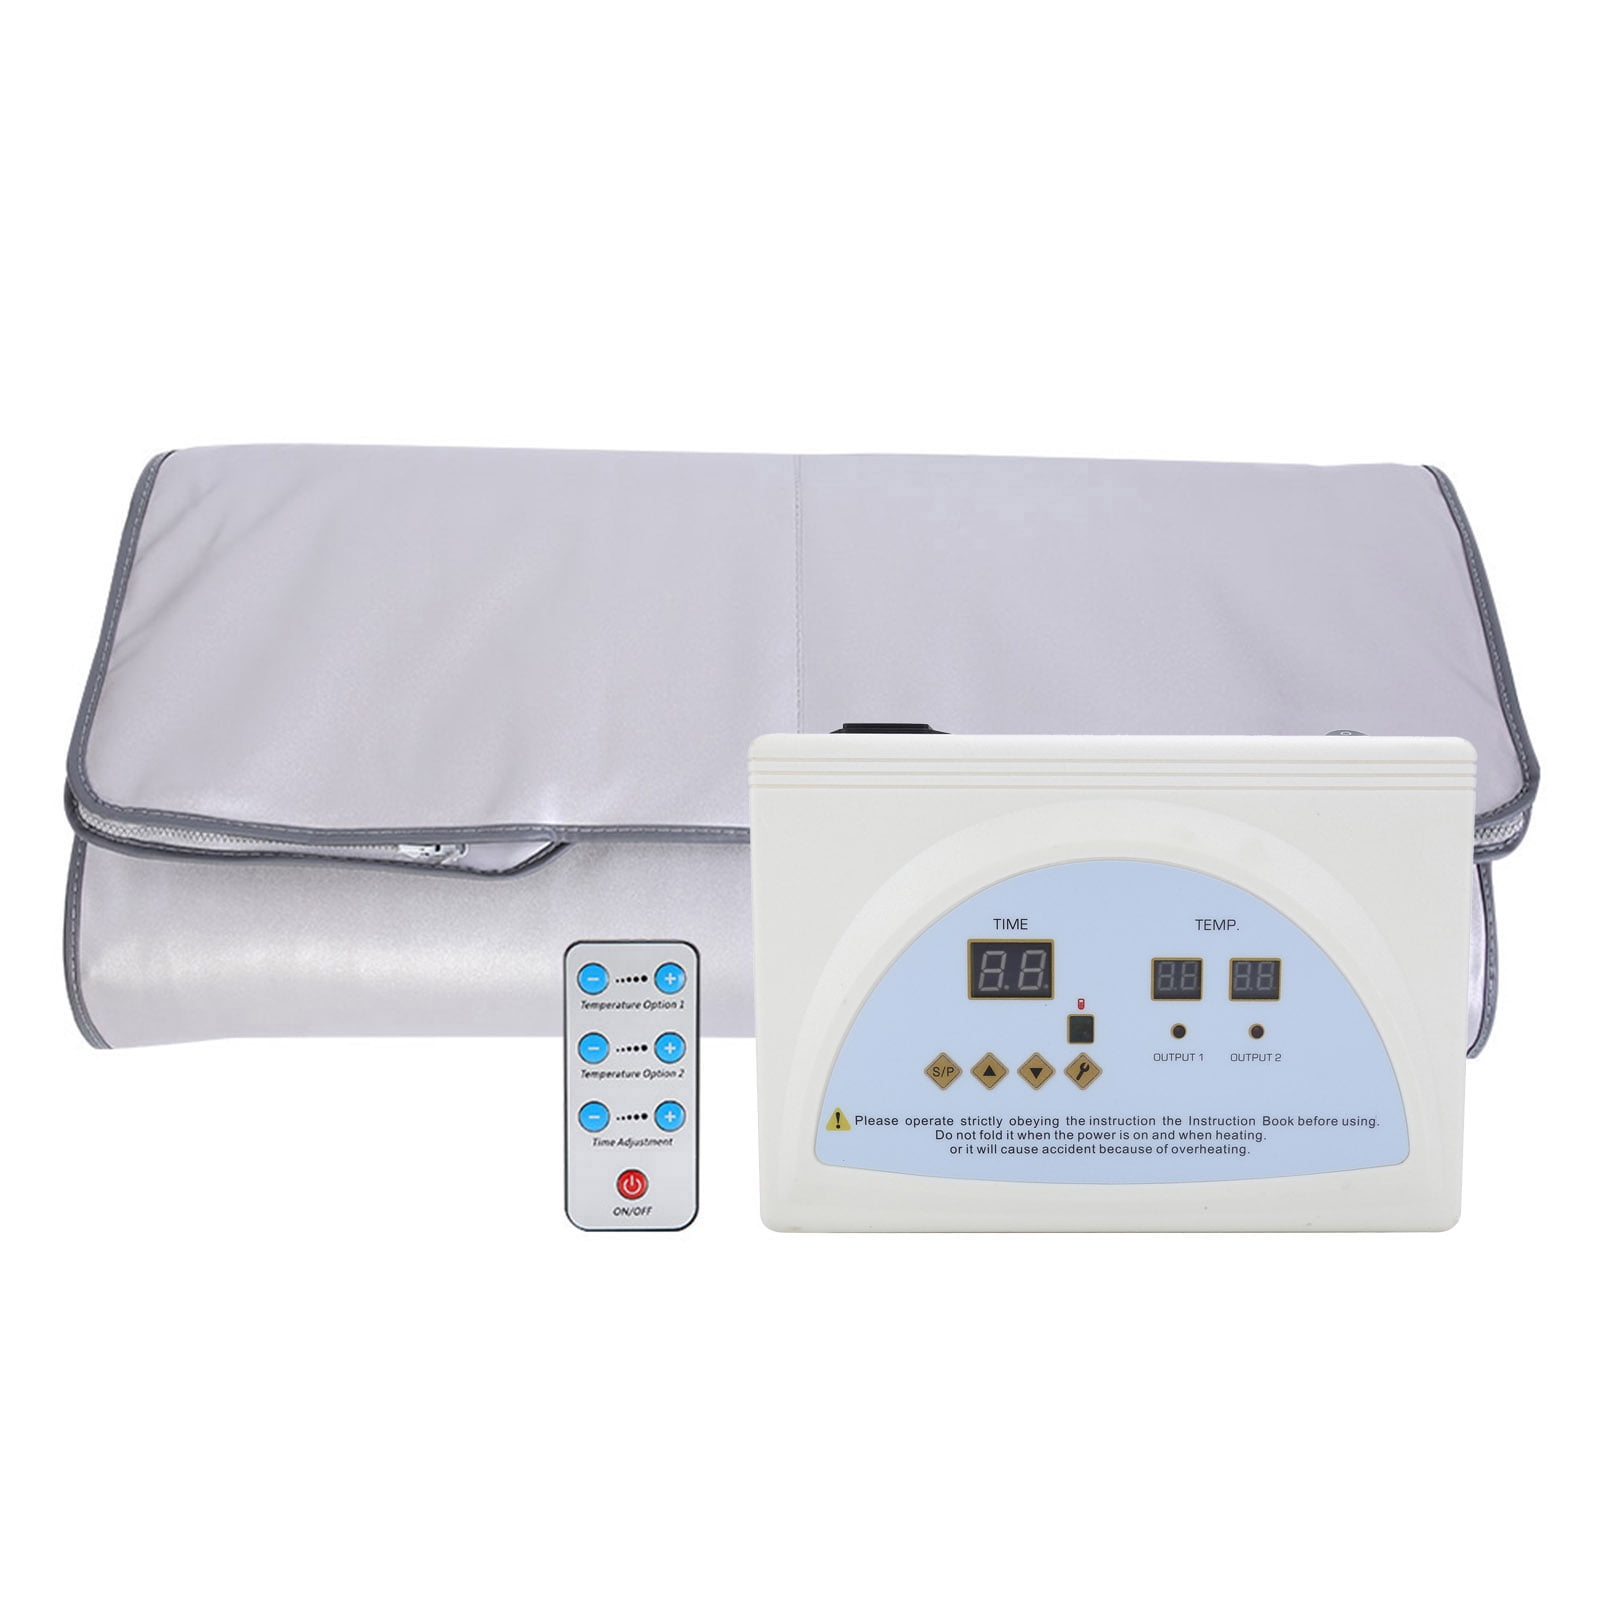 Far Infrared Sauna Blanket 110V Waterproof Detoxification Blanket with Safety Switch Used As Home Sauna for Body Shape Slimming Fitness US